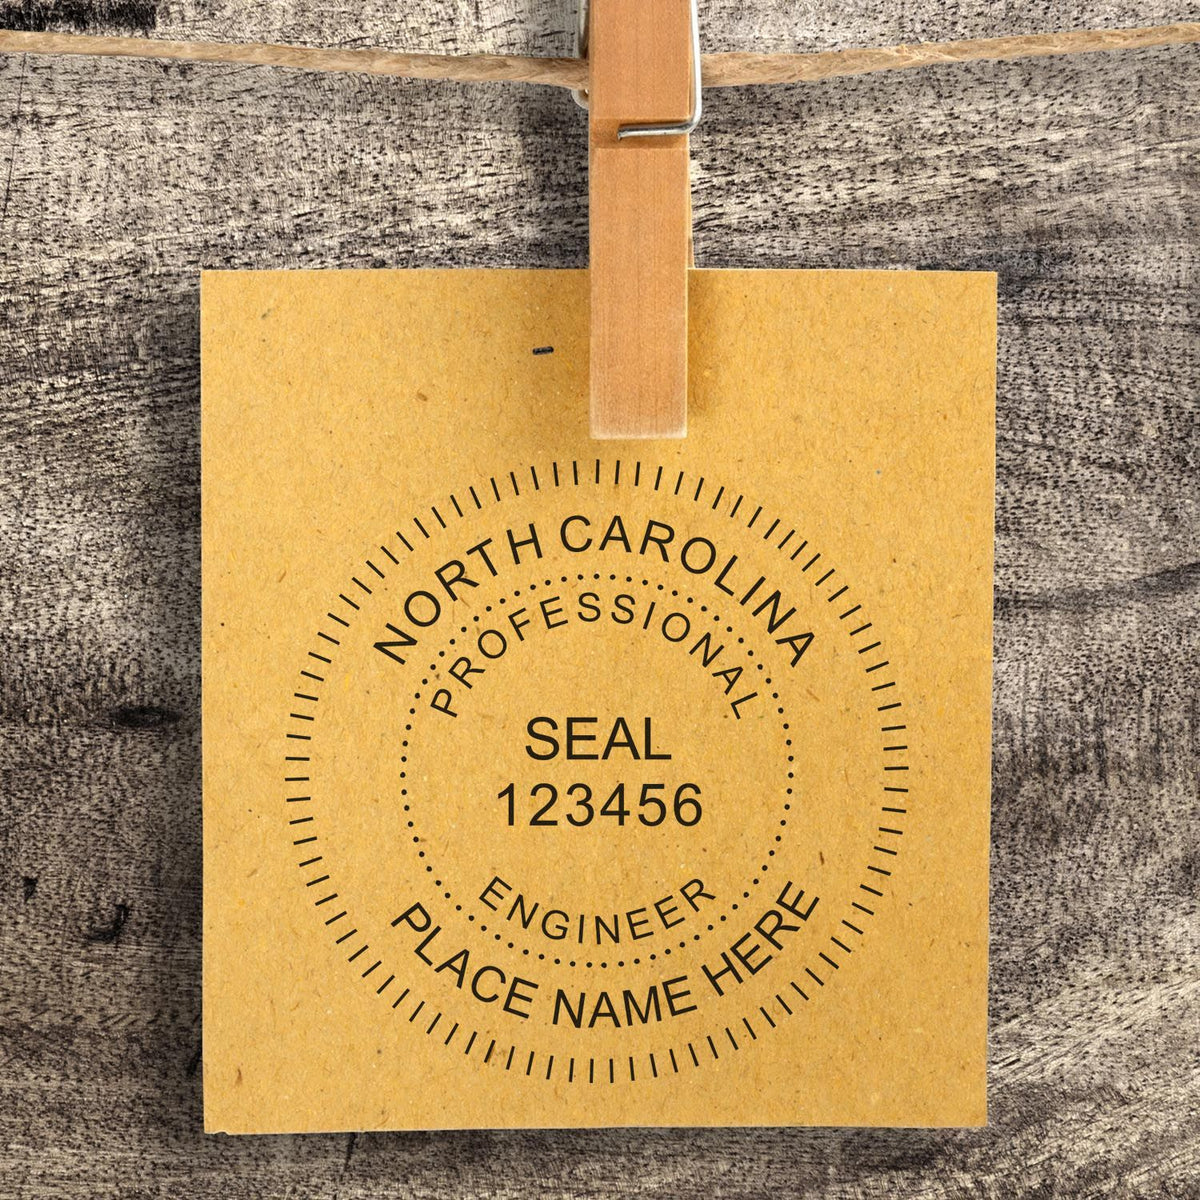 A stamped impression of the Slim Pre-Inked North Carolina Professional Engineer Seal Stamp in this stylish lifestyle photo, setting the tone for a unique and personalized product.